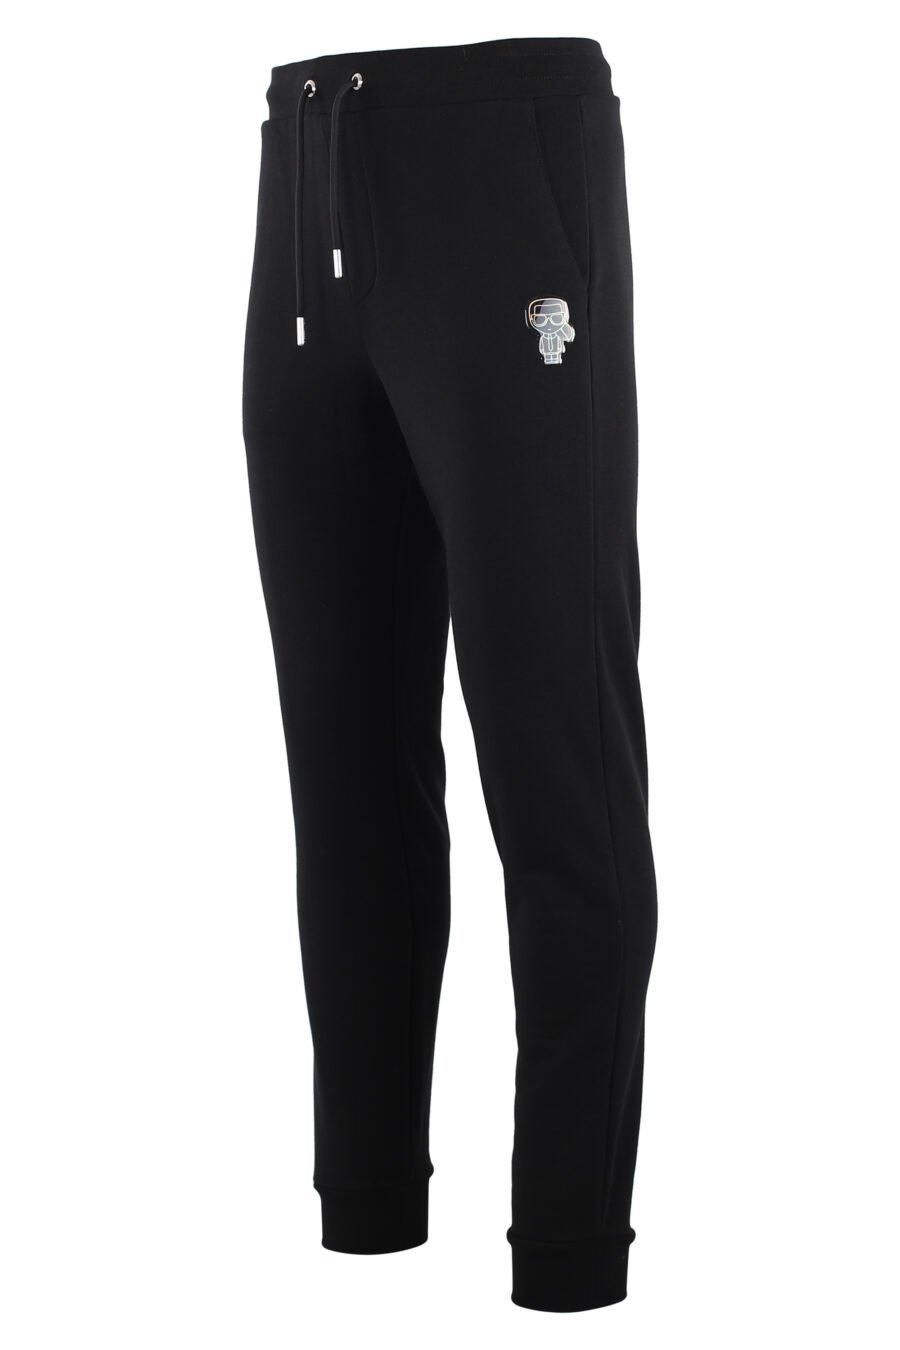 Tracksuit bottoms black with iridescent logo - IMG 7546